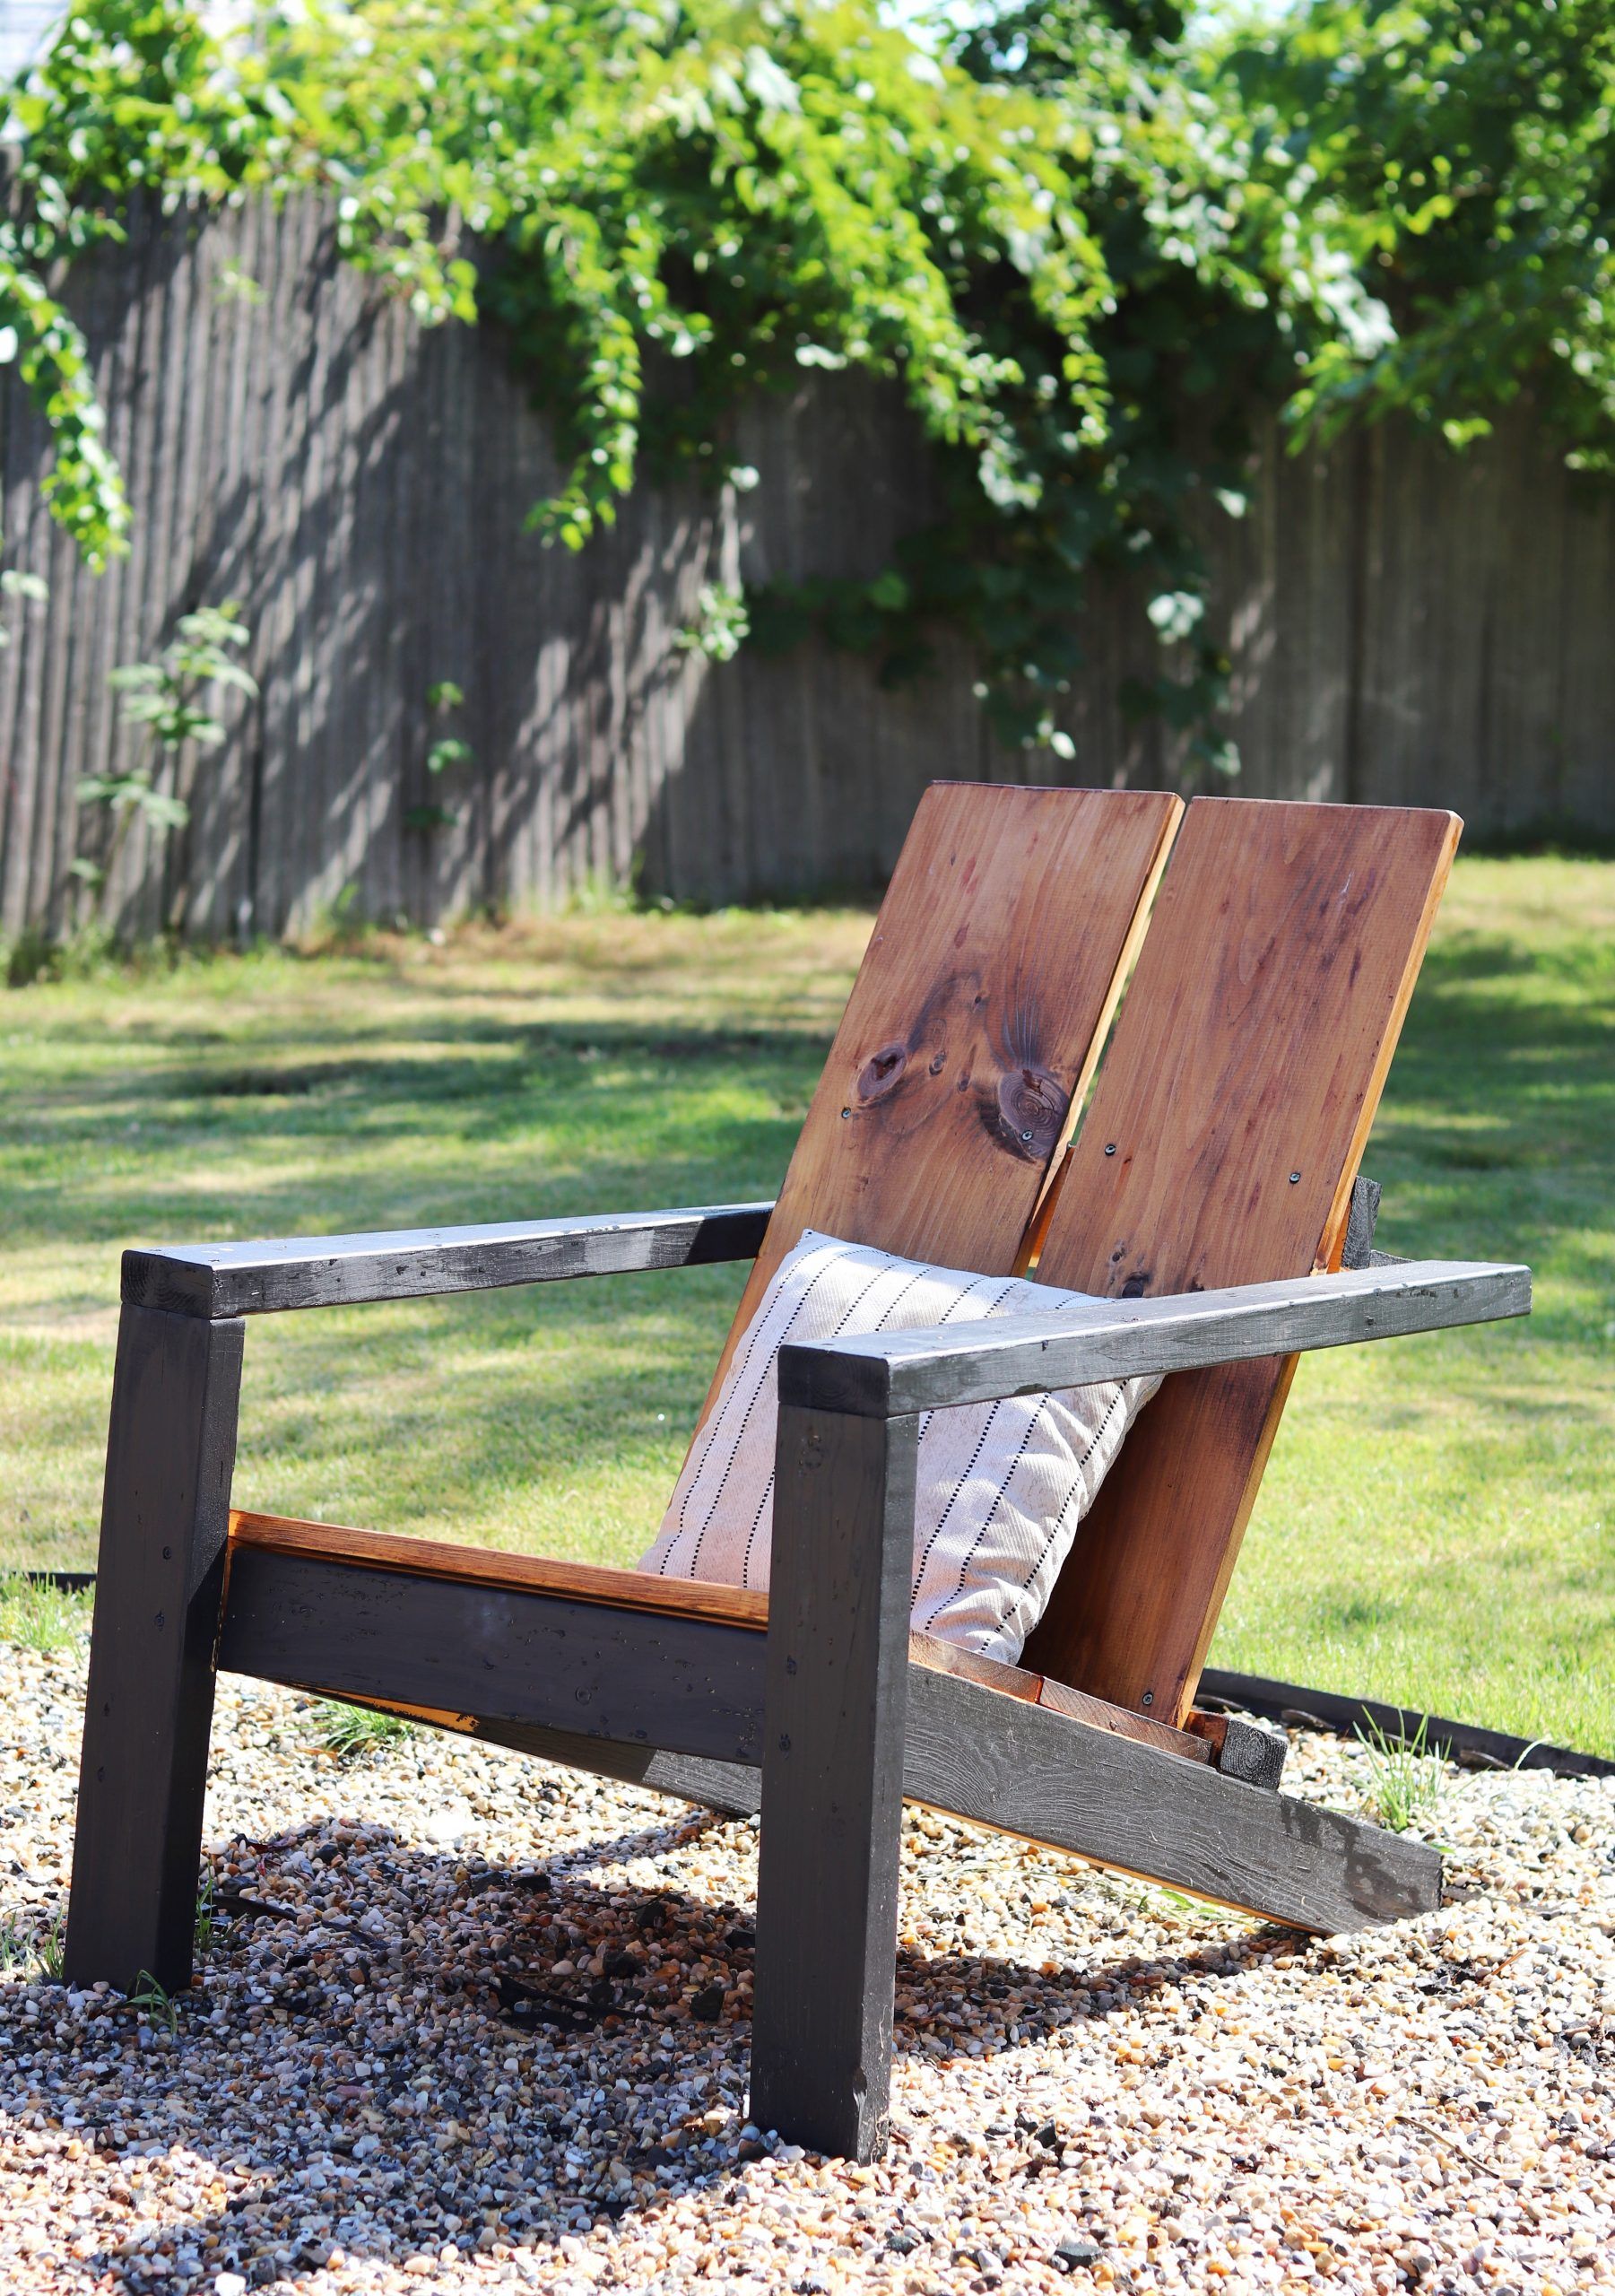 Outdoor Comfort: Relax in Style with Adirondack Chairs